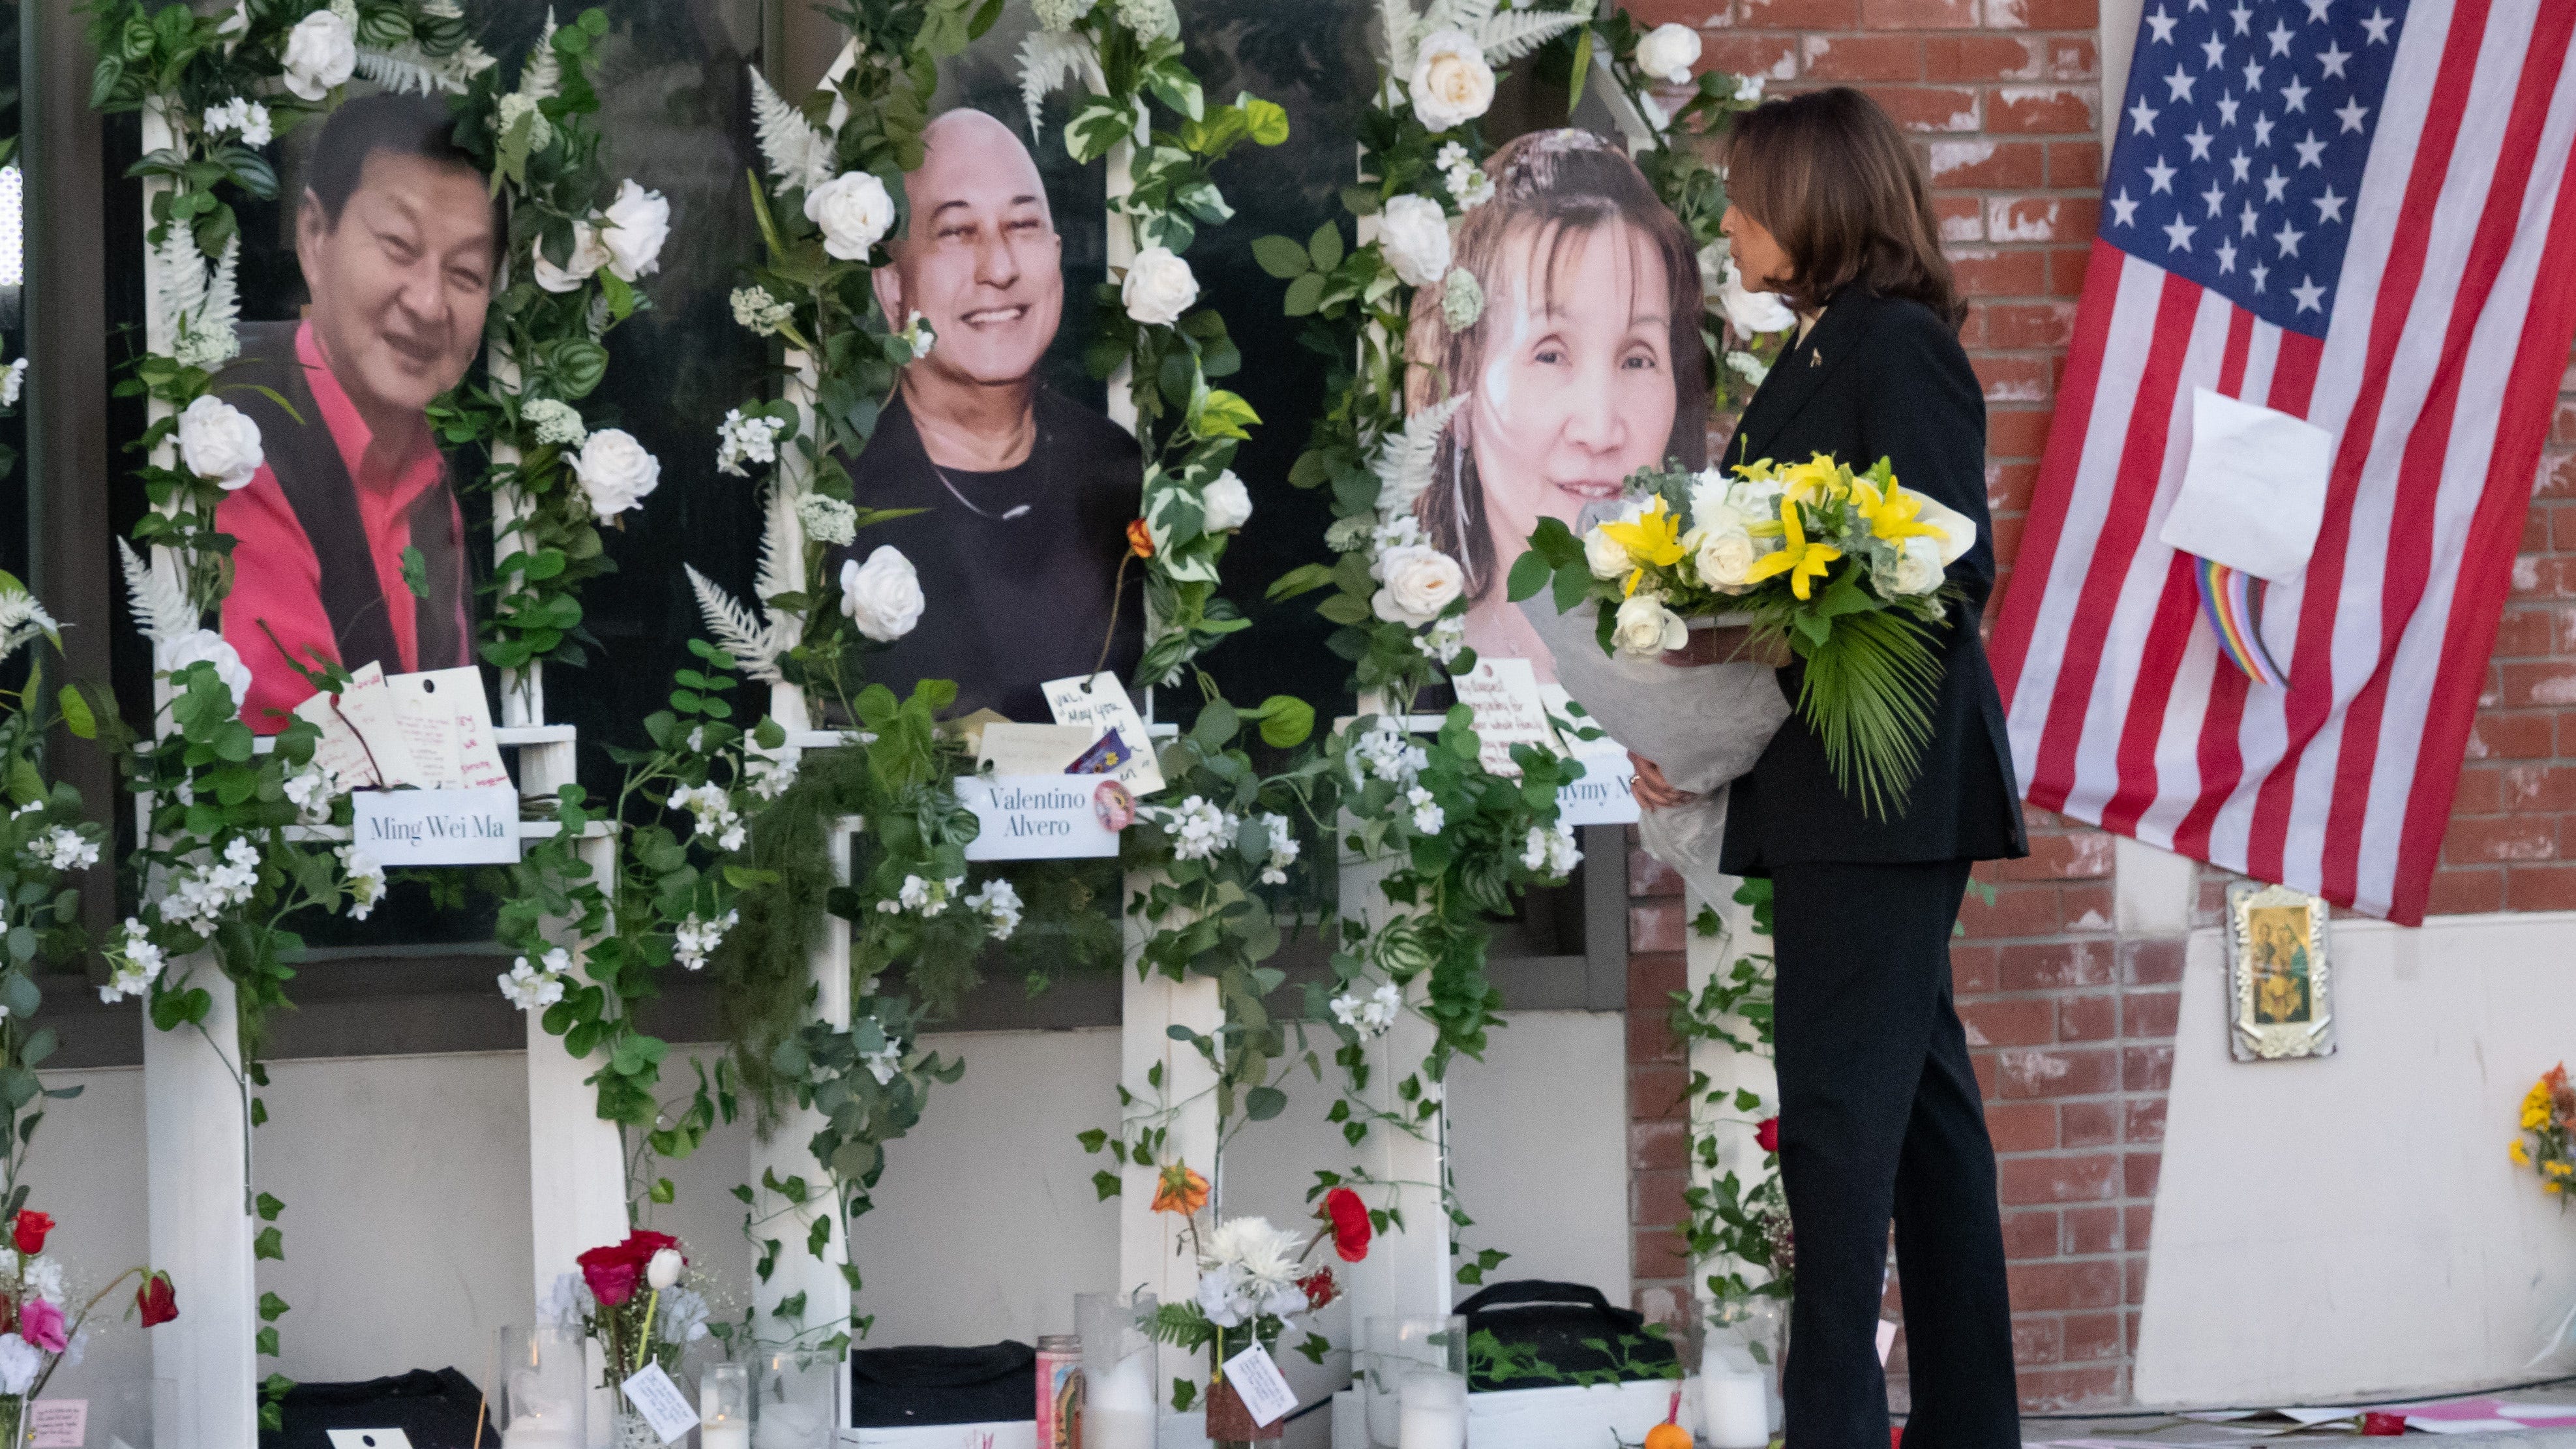 Vice President Kamala Harris visits the Star Ballroom Dance Studio in Monterey Park, California on Wednesday, Jan. 25, 2023. Harris visited the site of a shooting that claimed 11 lives to pay her respects and later met with the victims' families.